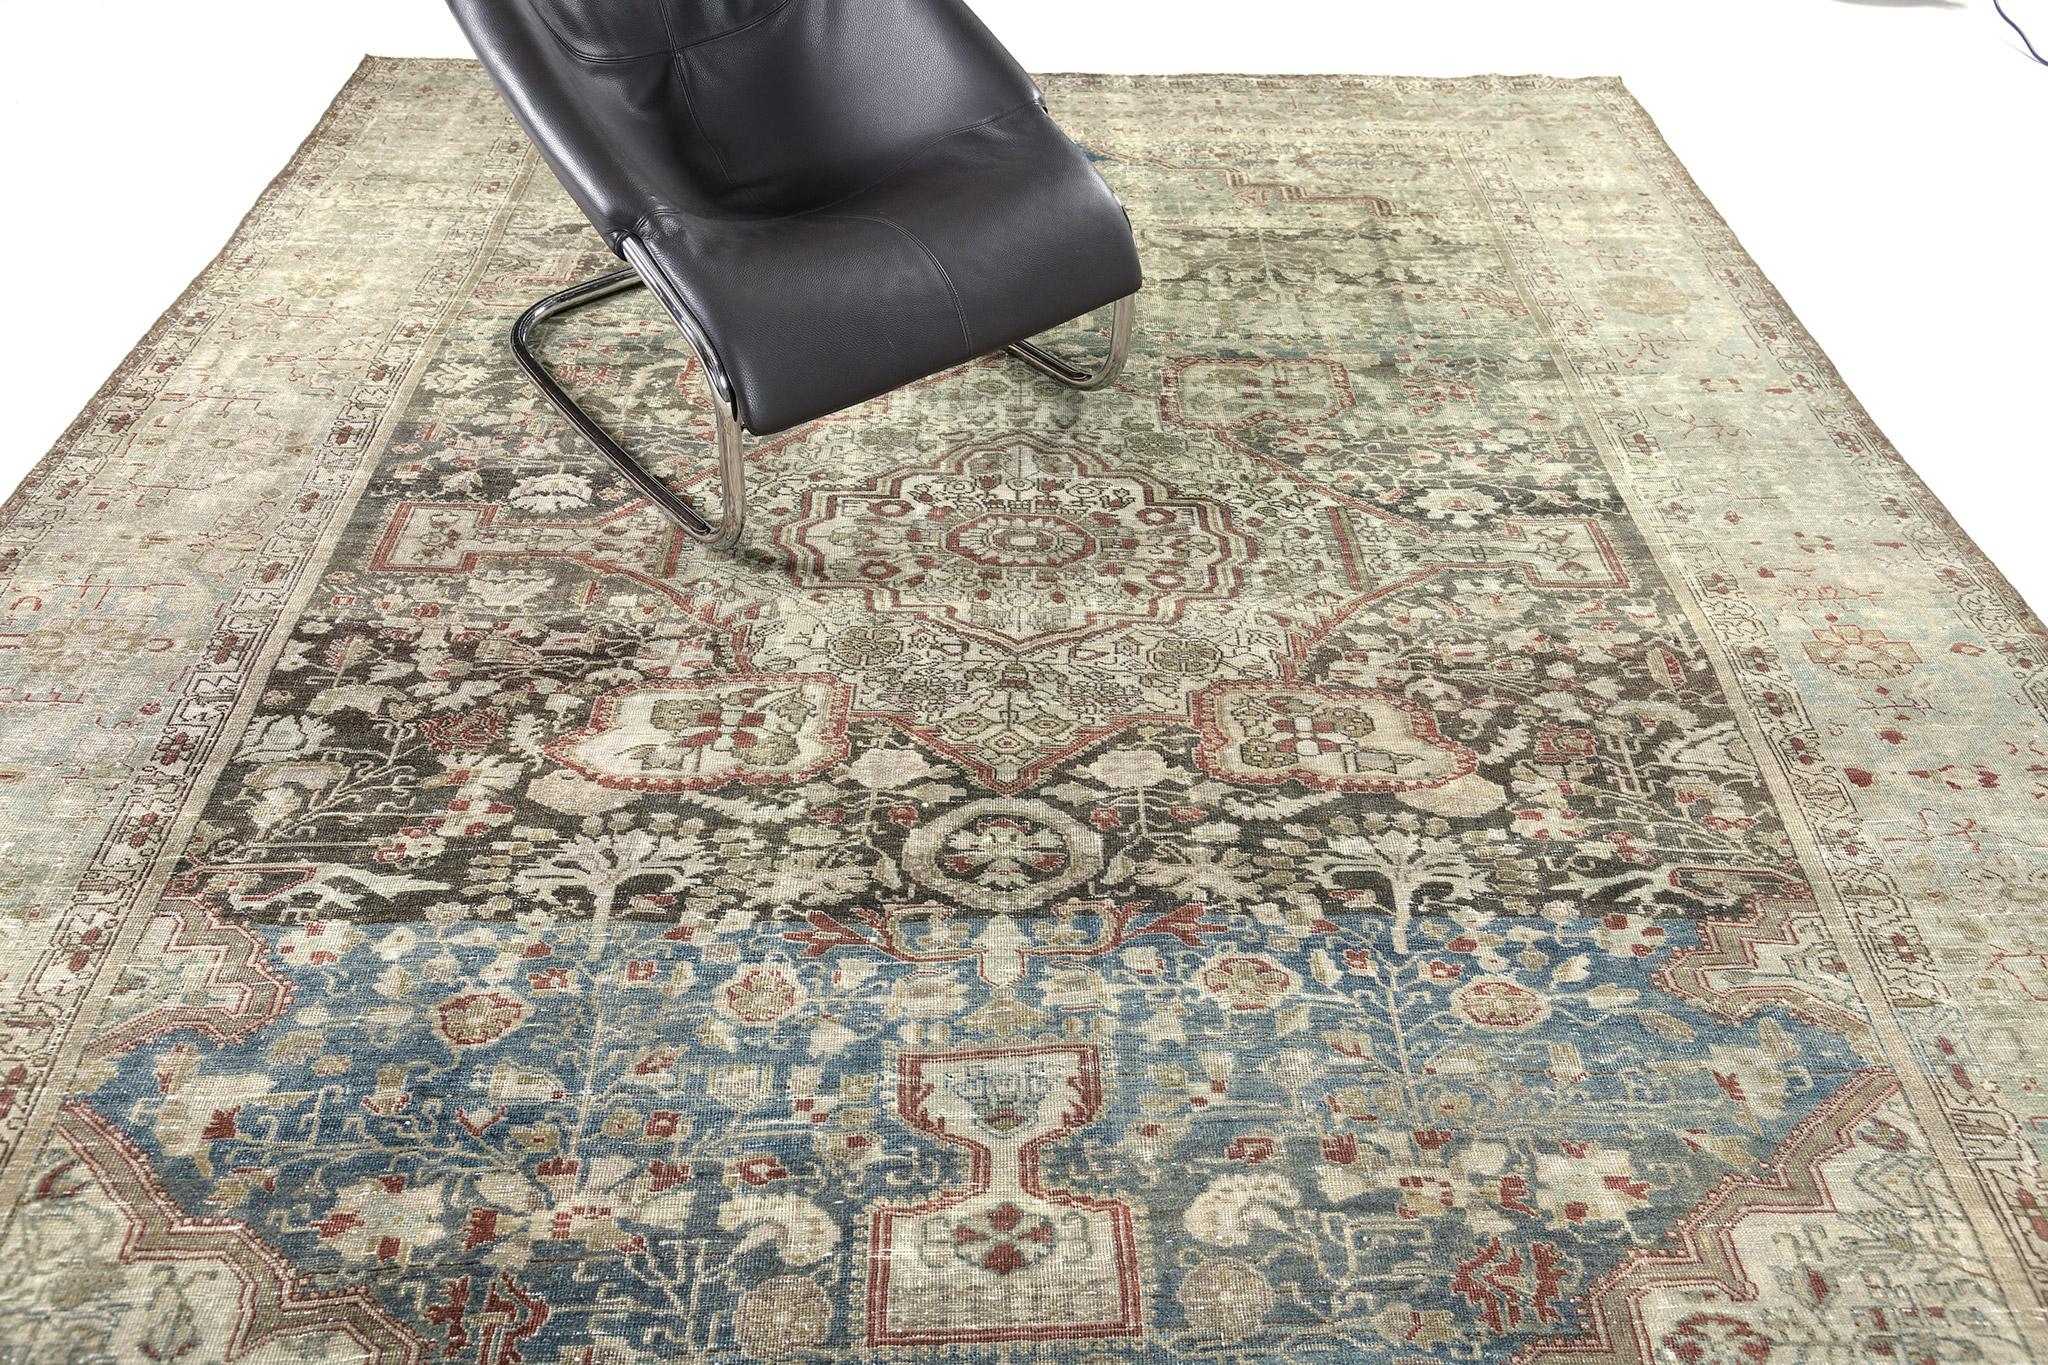 An alluring antique Persian Farahan rug that compels you to an all-over pattern of botanical elements that are woven to impress. The abrashed taupe field is covered by majestic patterns of blooming palmettes, alluring blossoms, and symmetrical